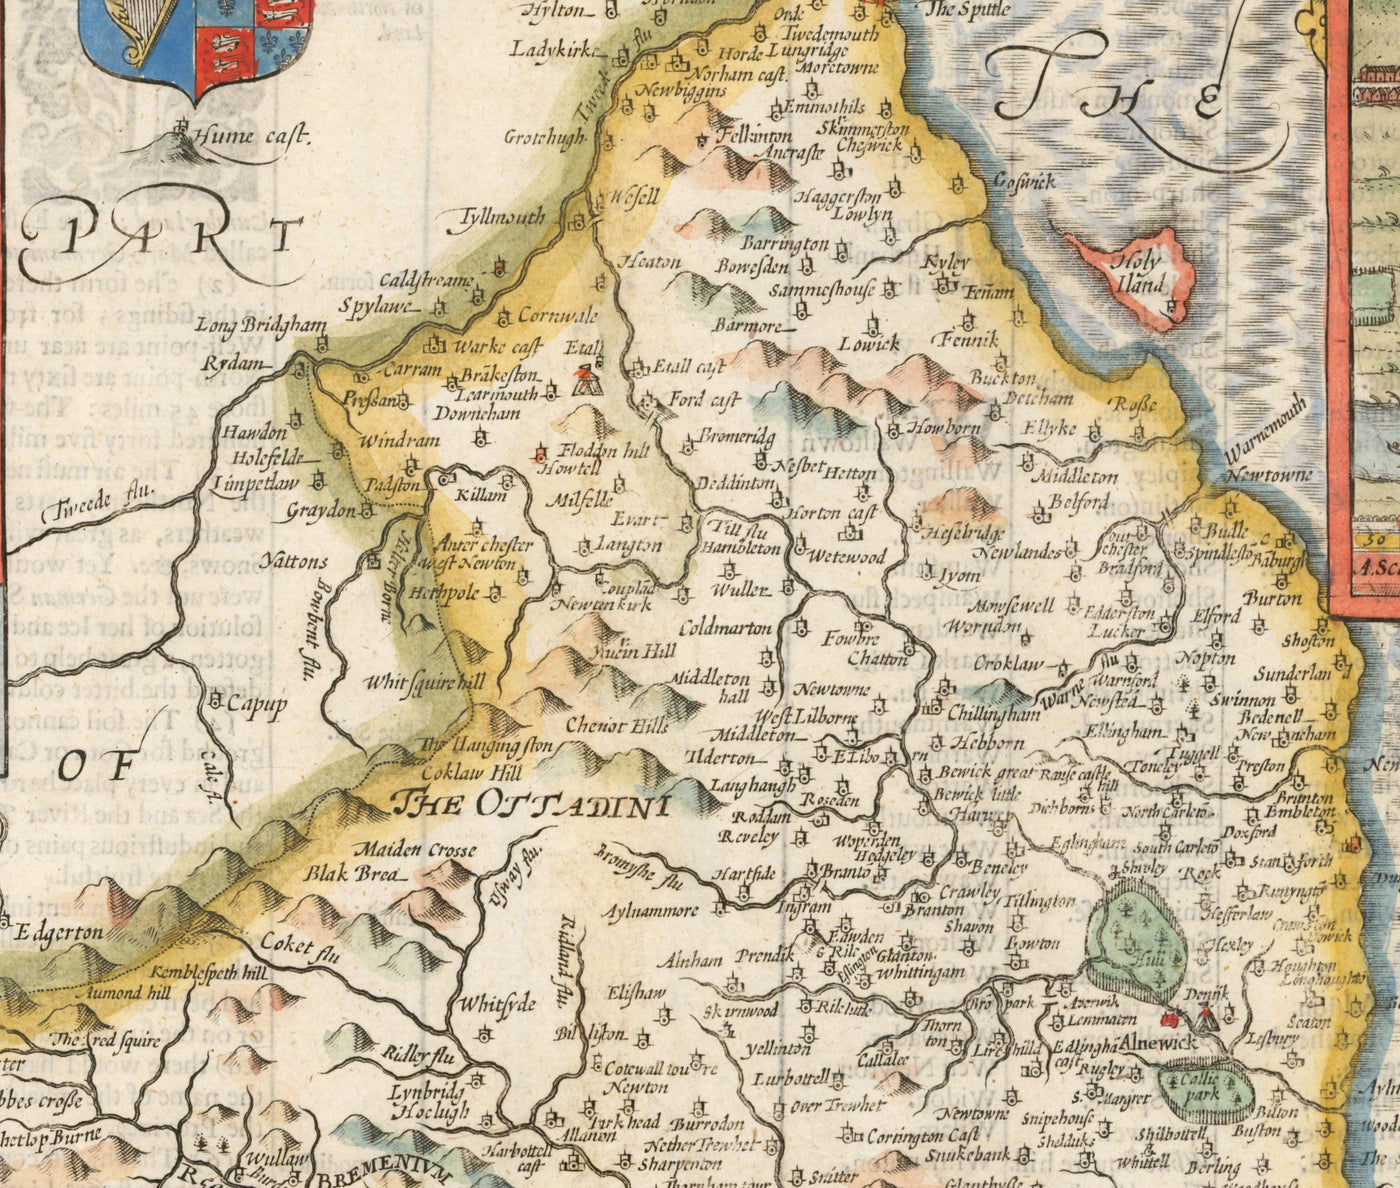 Old Map of Northumberland in 1611 by John Speed - Newcastle, Gateshead, Hadrian's Wall, Tyne and Wear